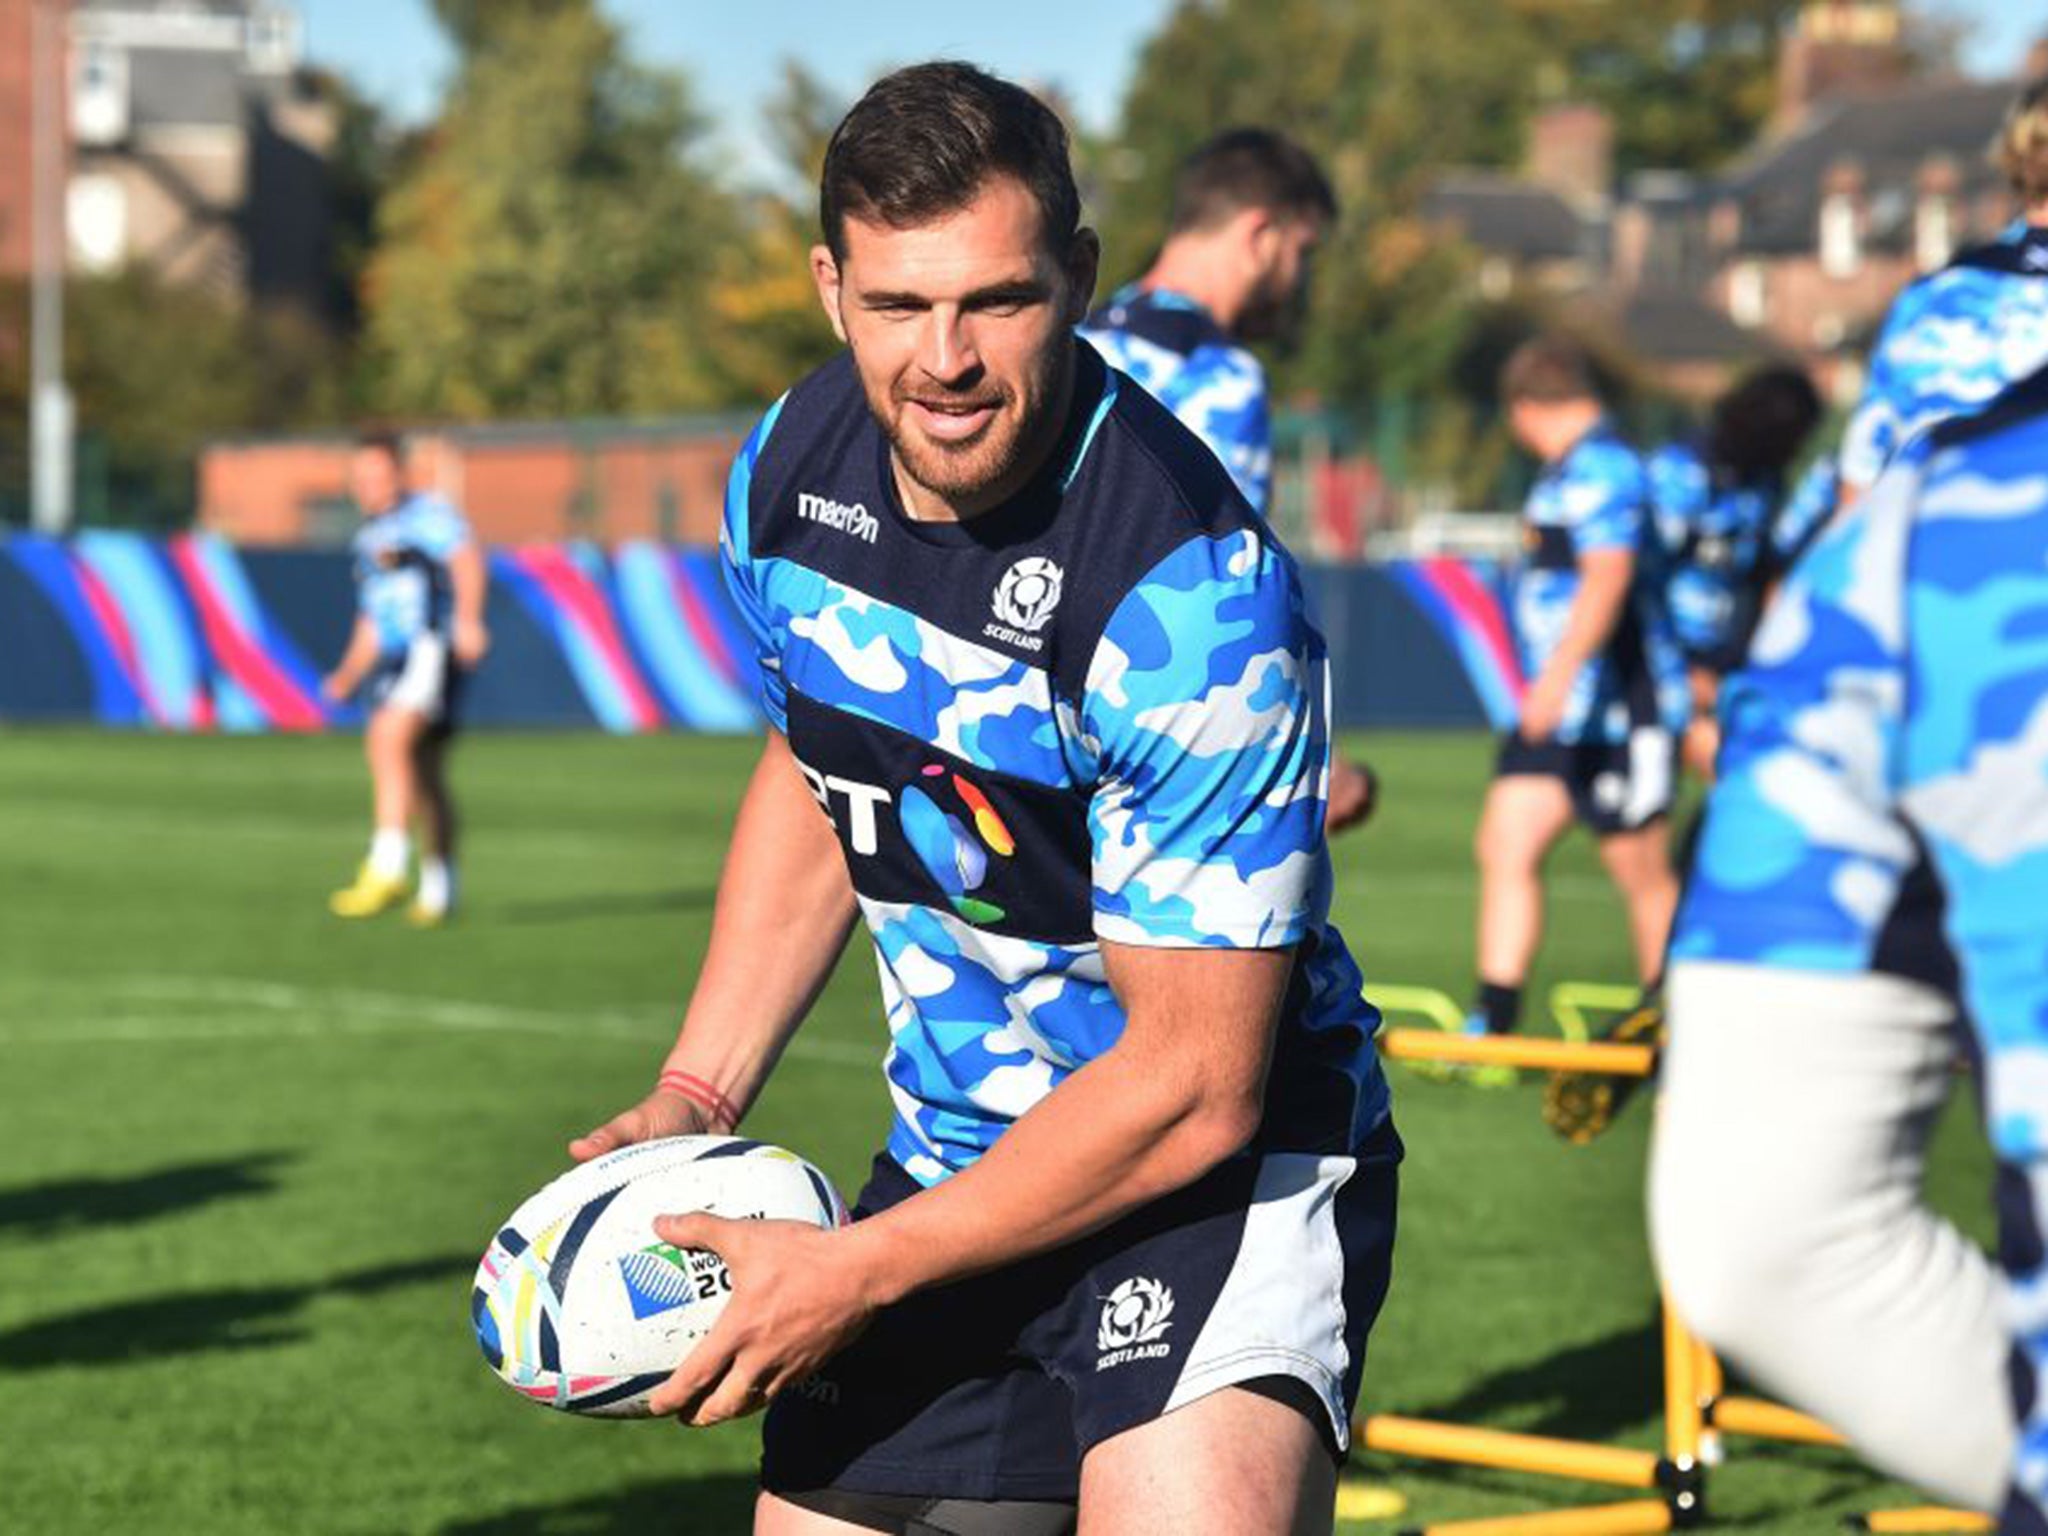 The winger Sean Lamont has a warning for Australia about taking Scotland lightly